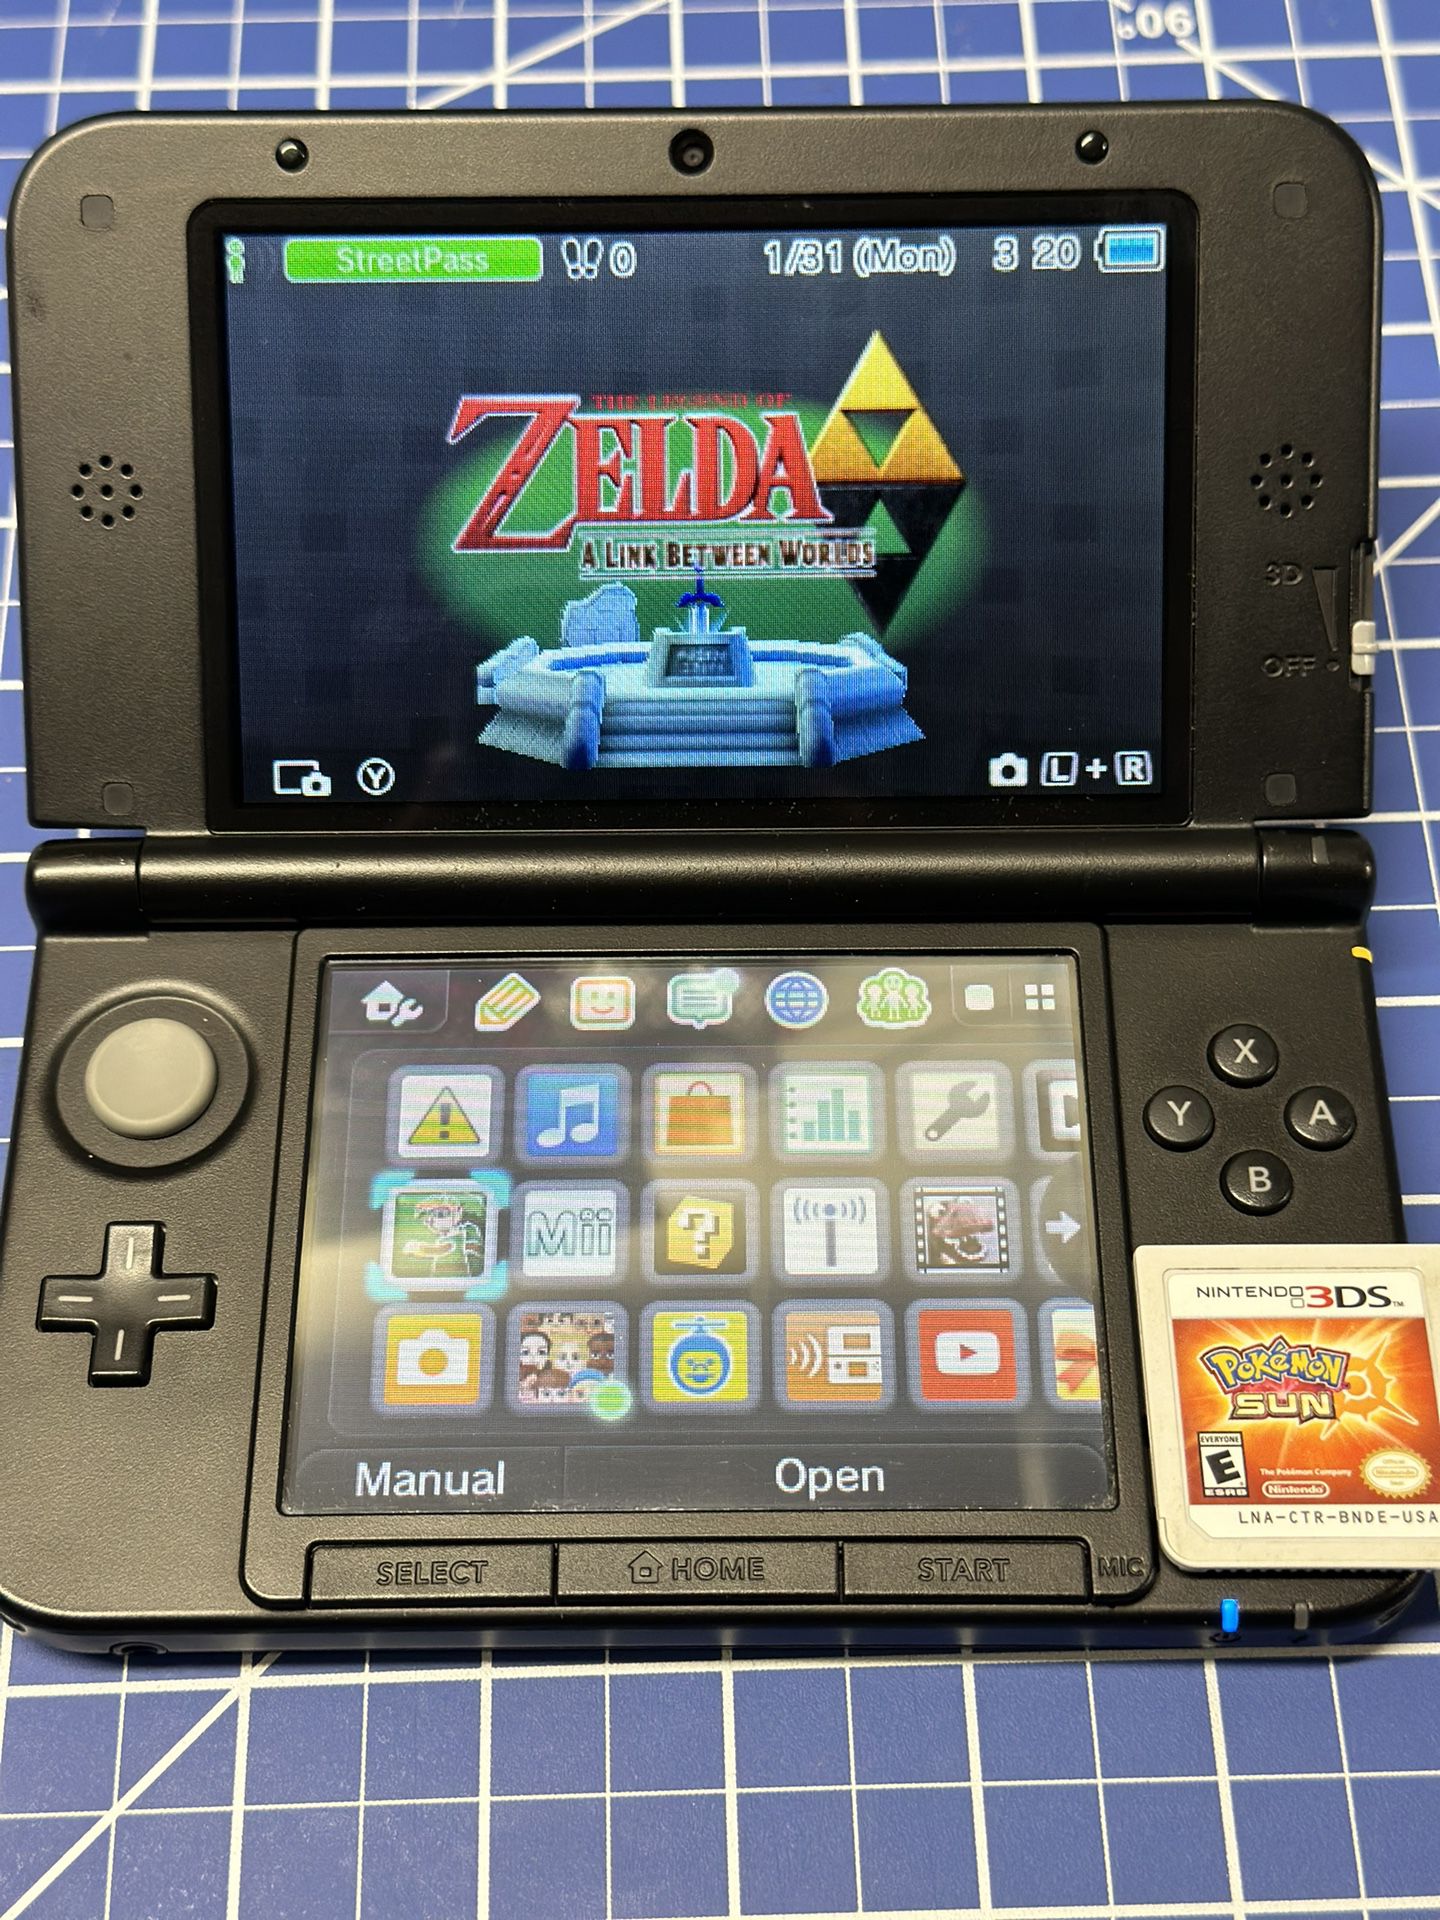 Nintendo 3DS XL Launch Edition With Pokémon Sun And Zelda a Link Between Worlds